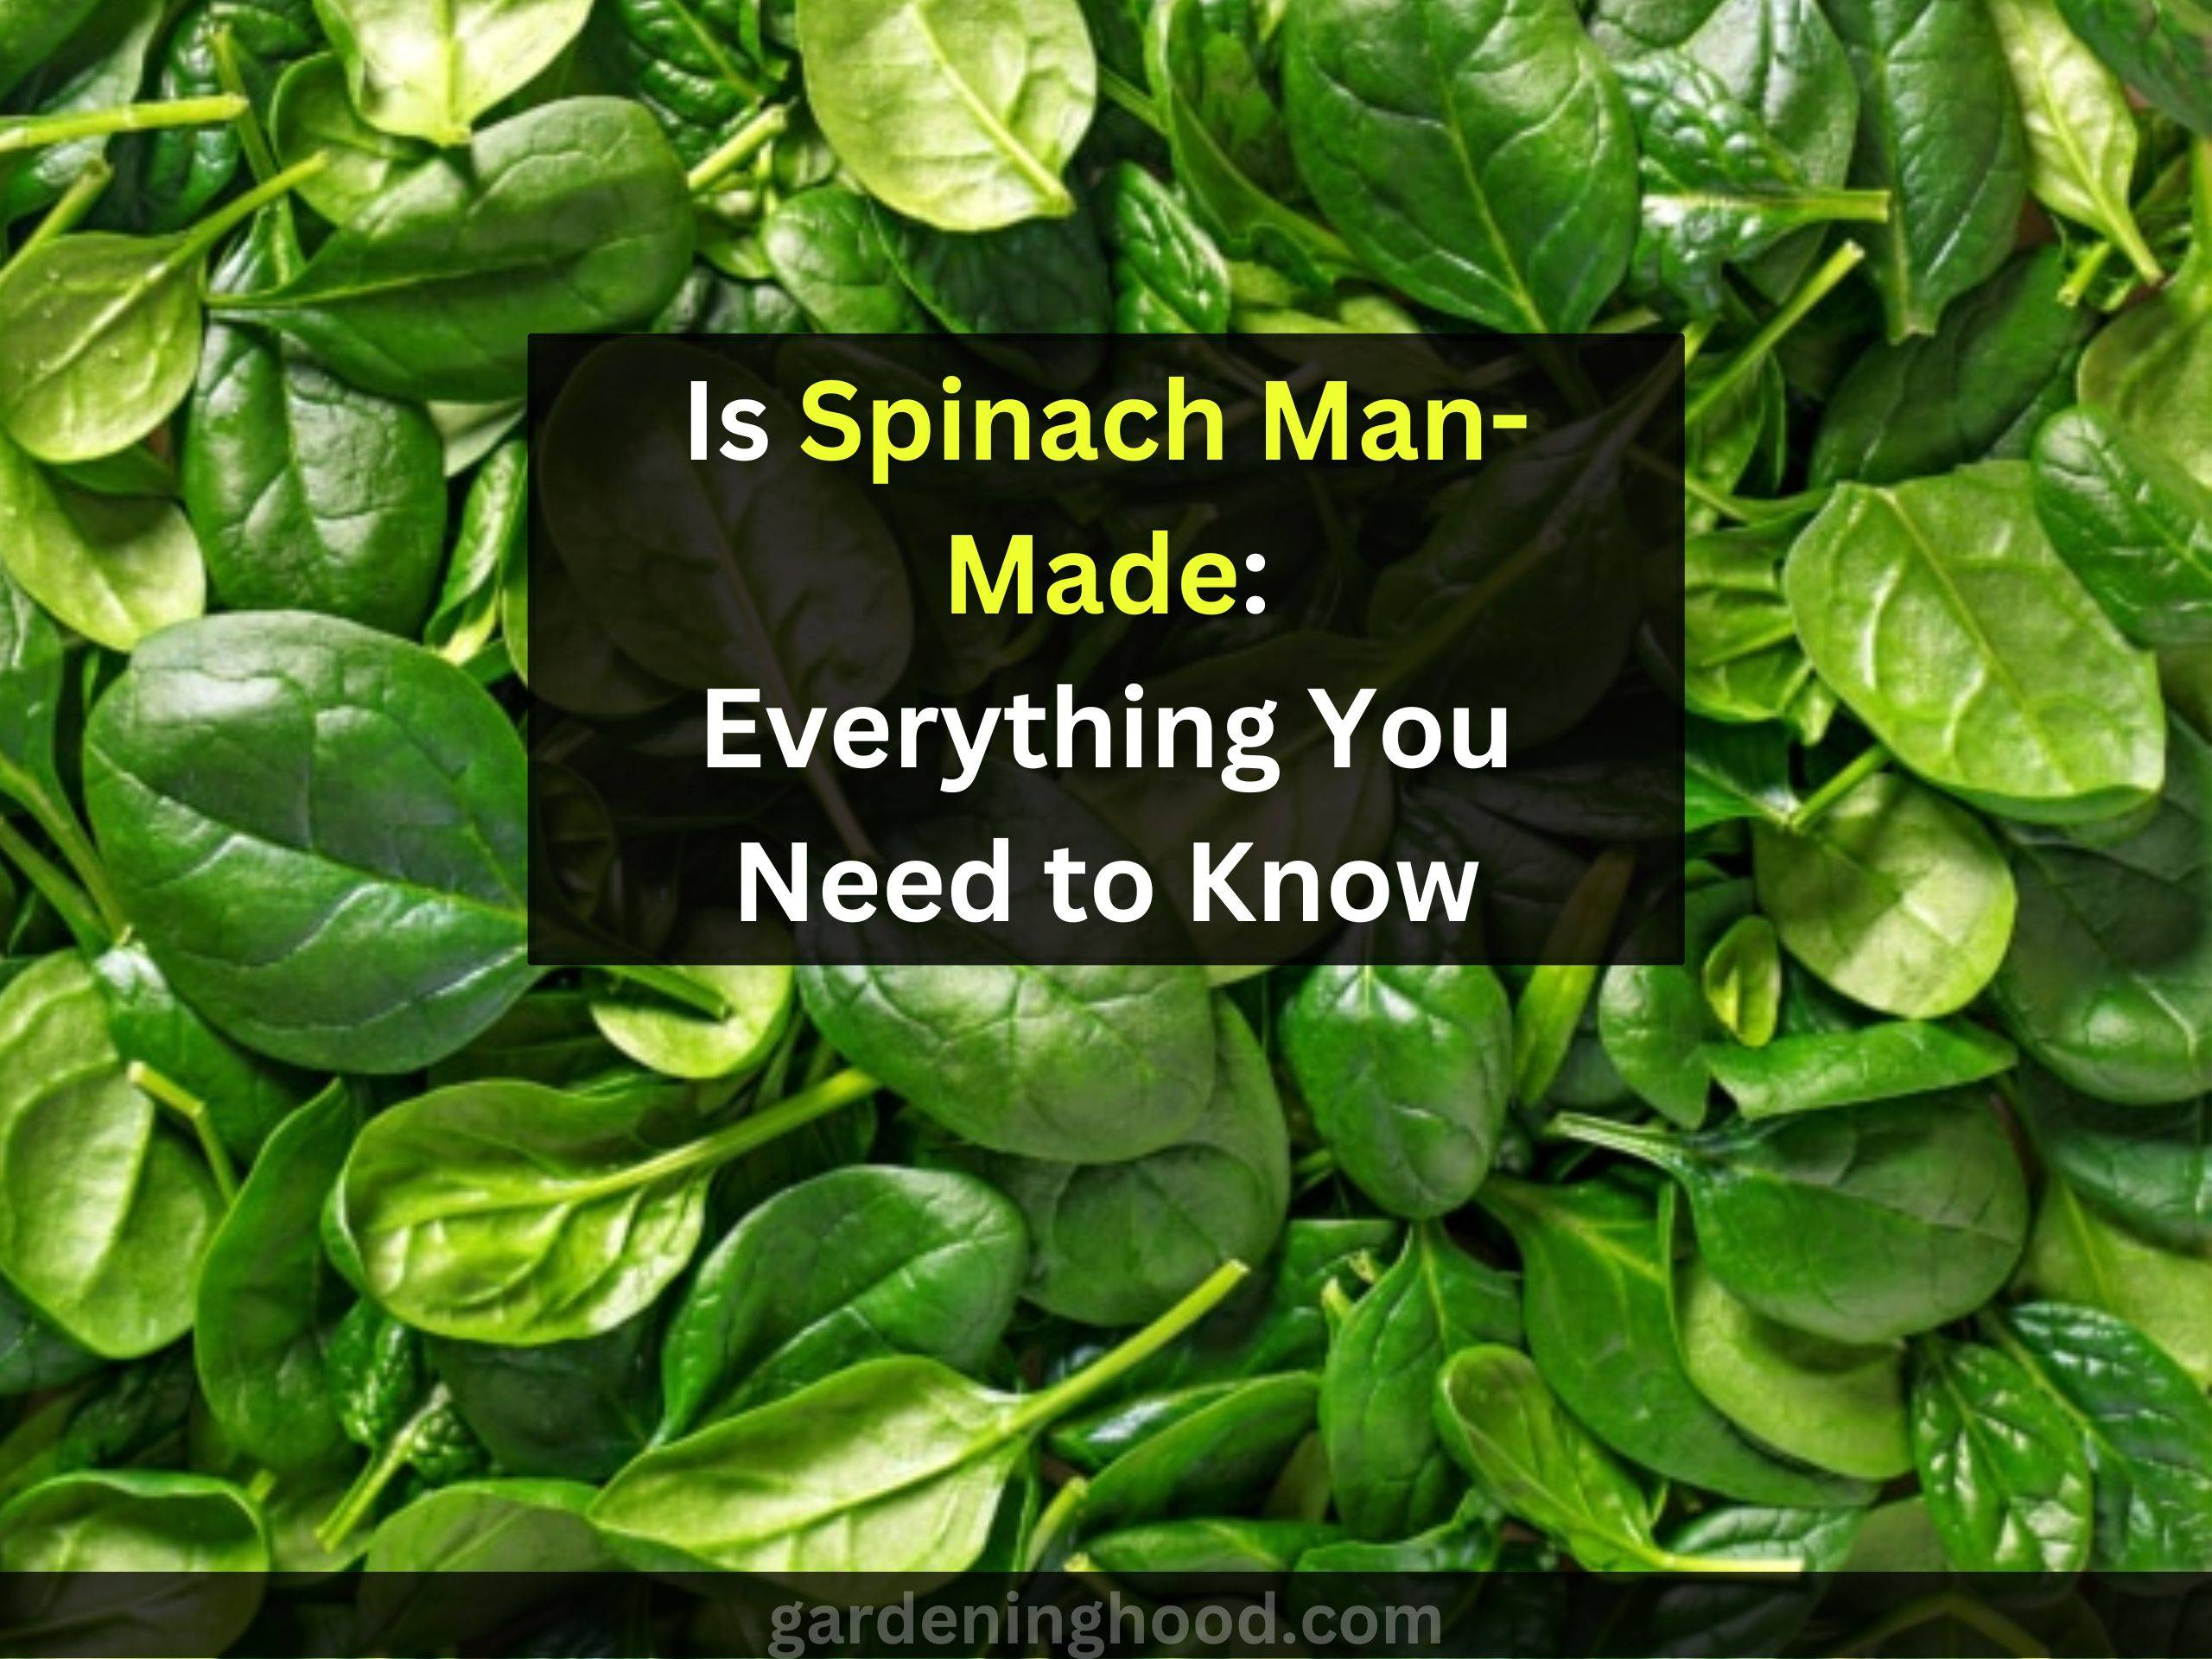 Is Spinach Man-Made: Everything You Need to Know